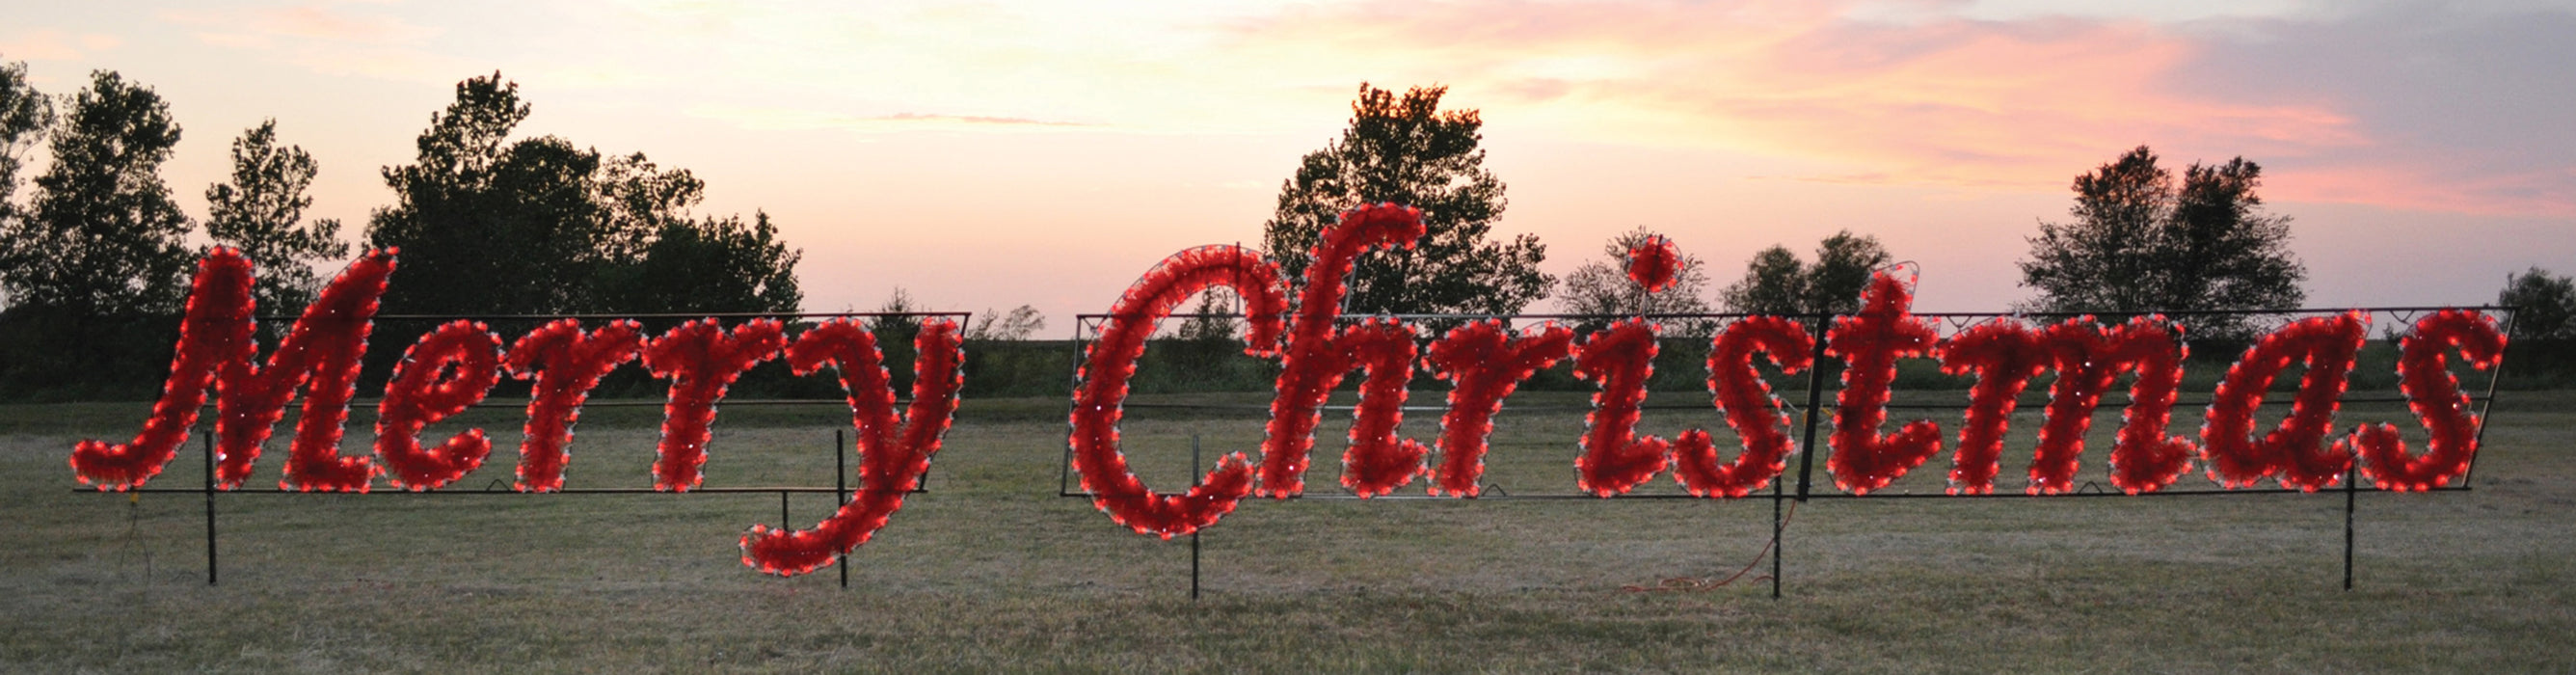 Daytime view, giant, large, commercial-grade, outdoor, sign, script, merry Christmas, holiday, LED, bulb, C7, red, garland, light, quality, durable, traditional, yard motif, 2021